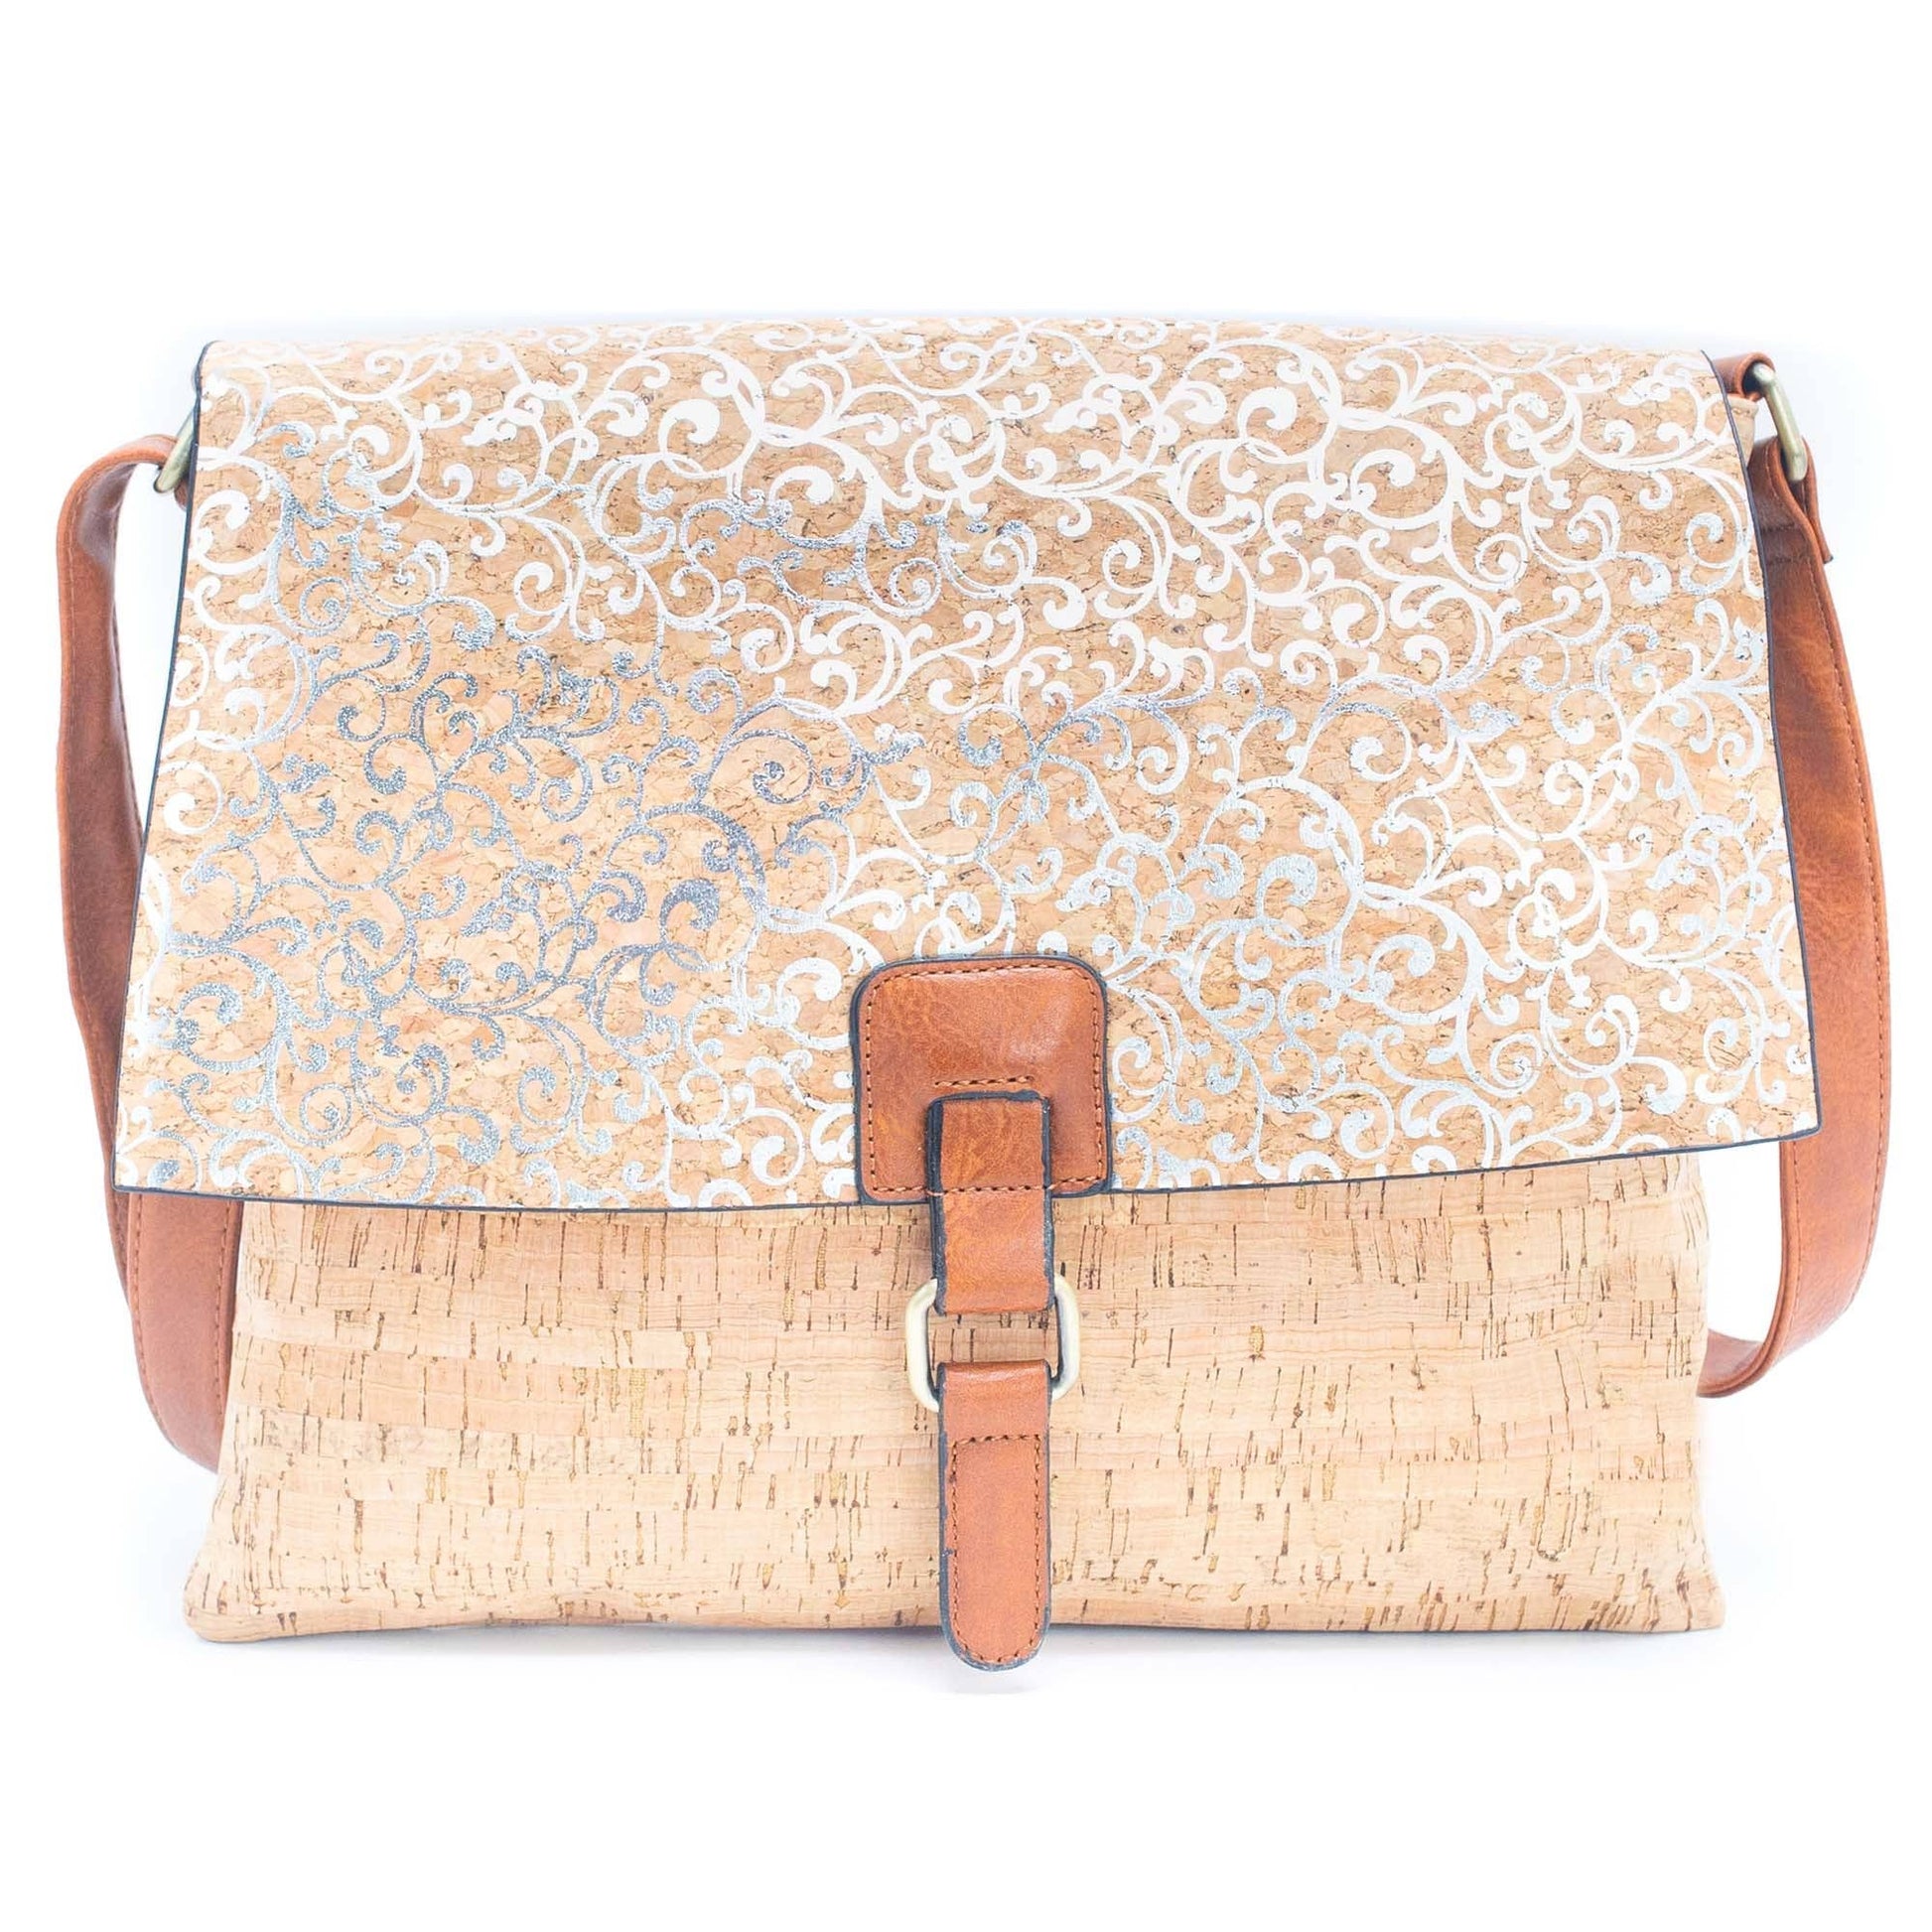 Cork Crossbody Bag with Mosaic and Floral Prints BAGD-464-12